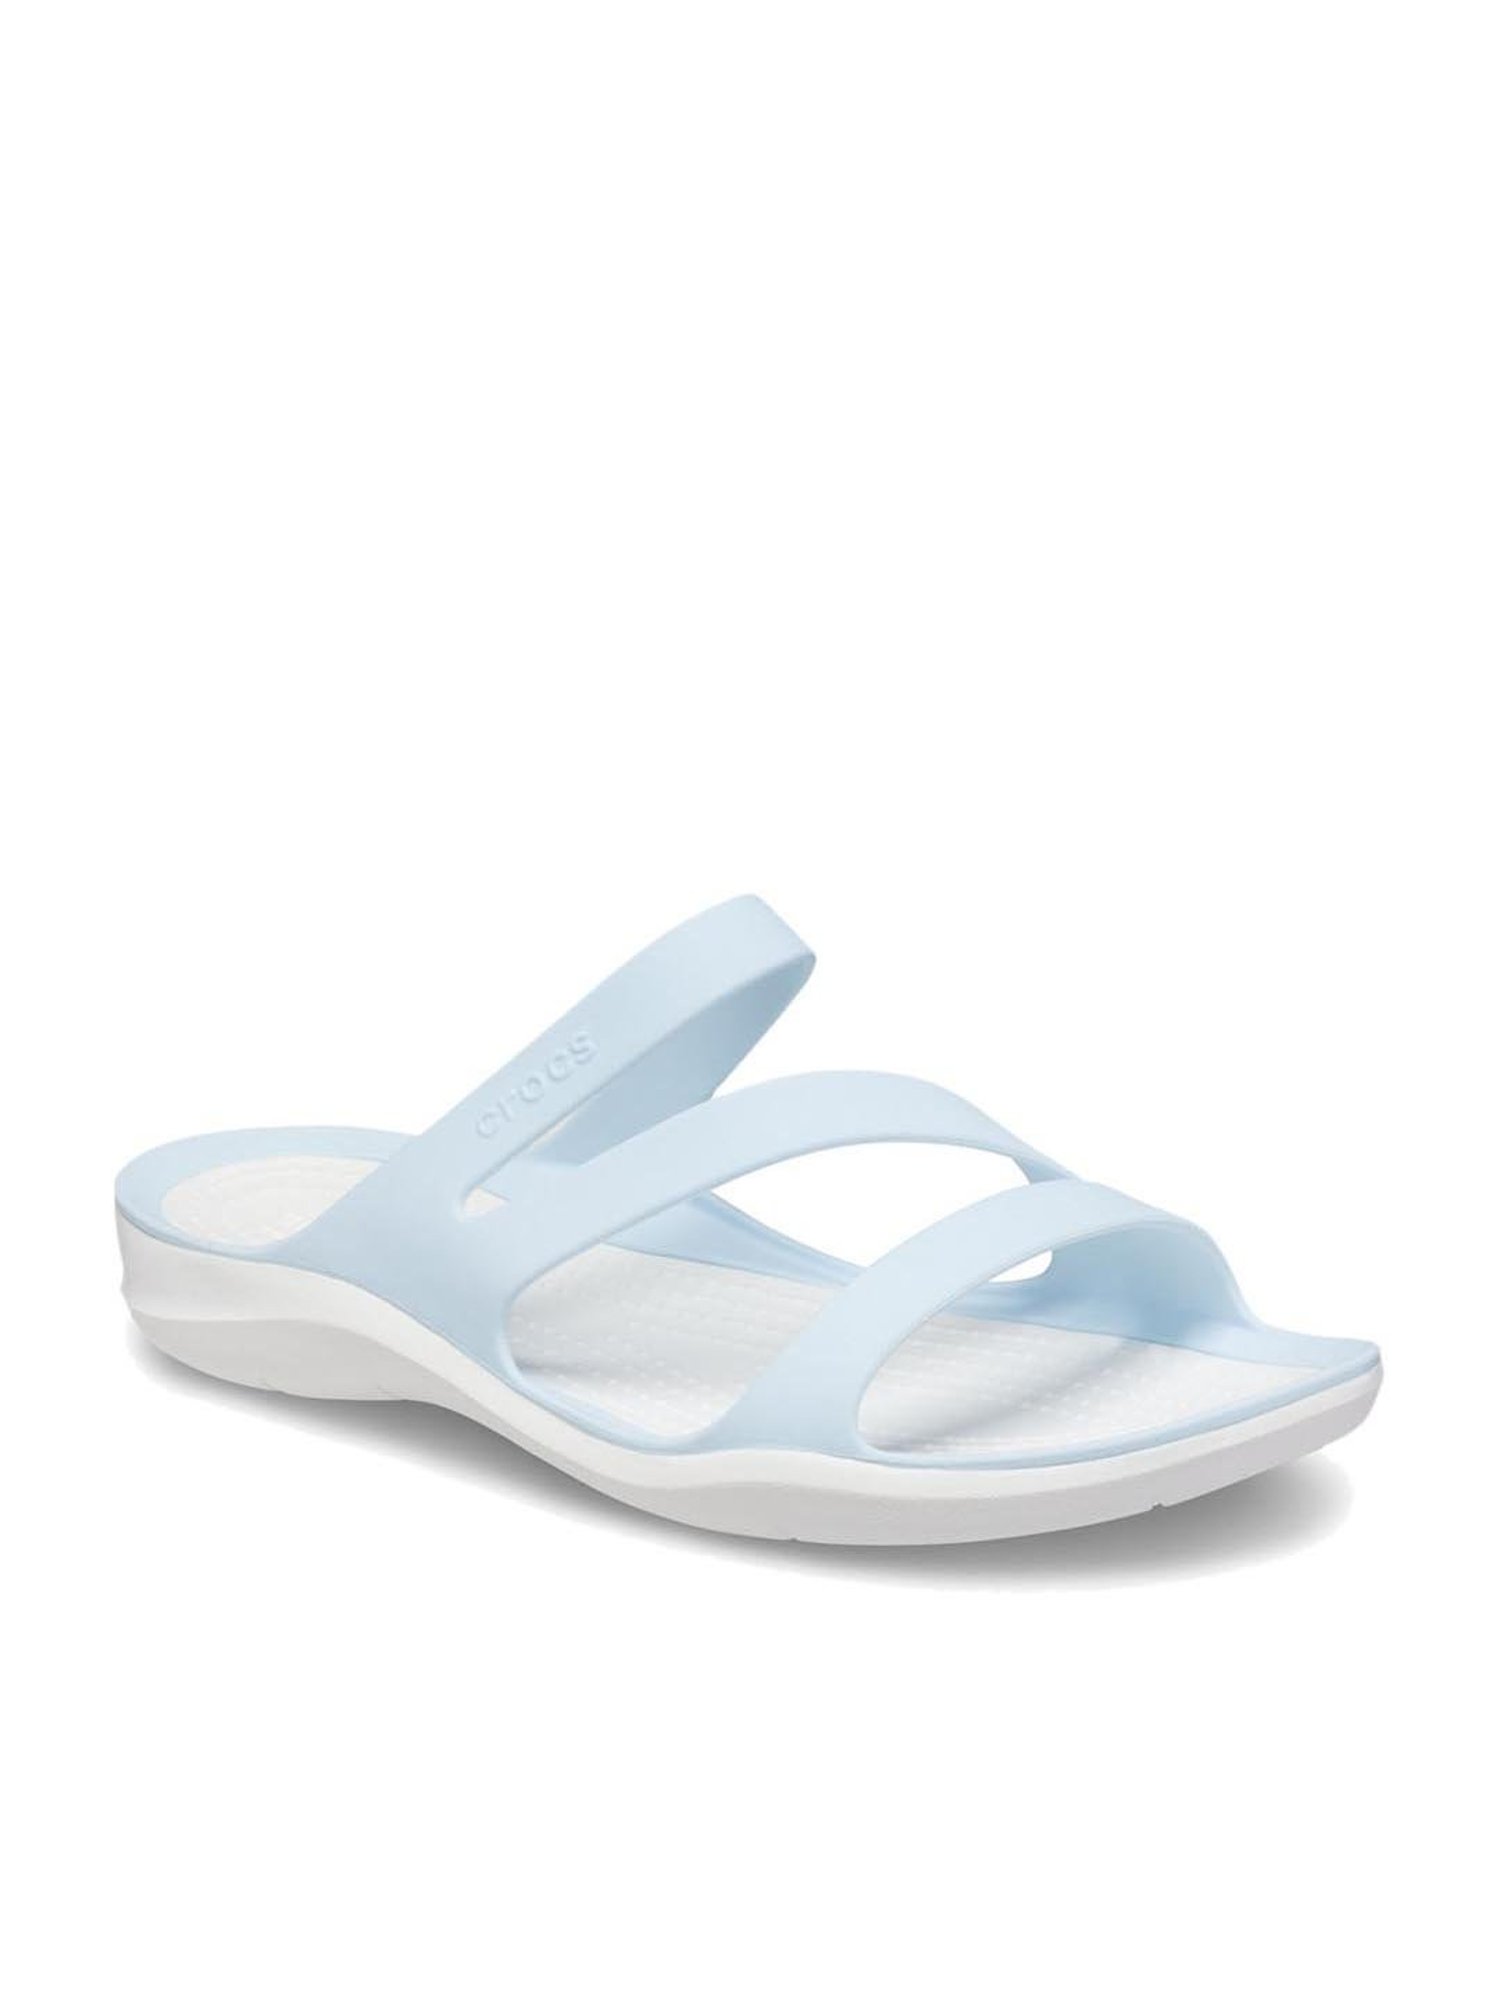 Crocs Swiftwater Womens Slip On Sandals - Women from Charles Clinkard UK